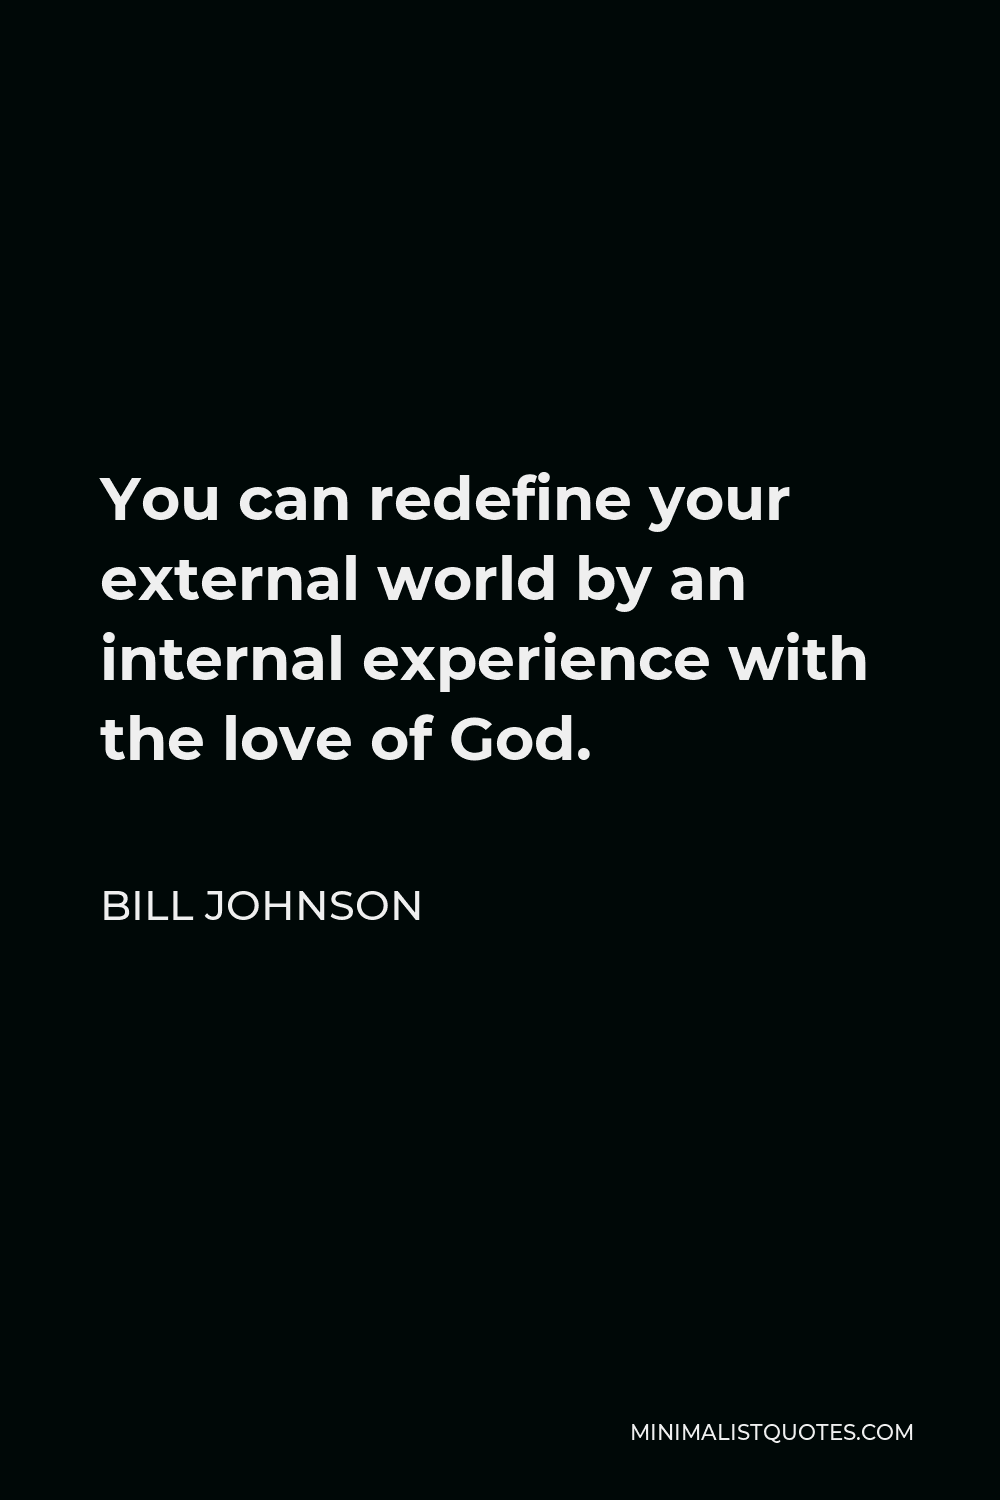 Bill Johnson Quote - You can redefine your external world by an internal experience with the love of God.